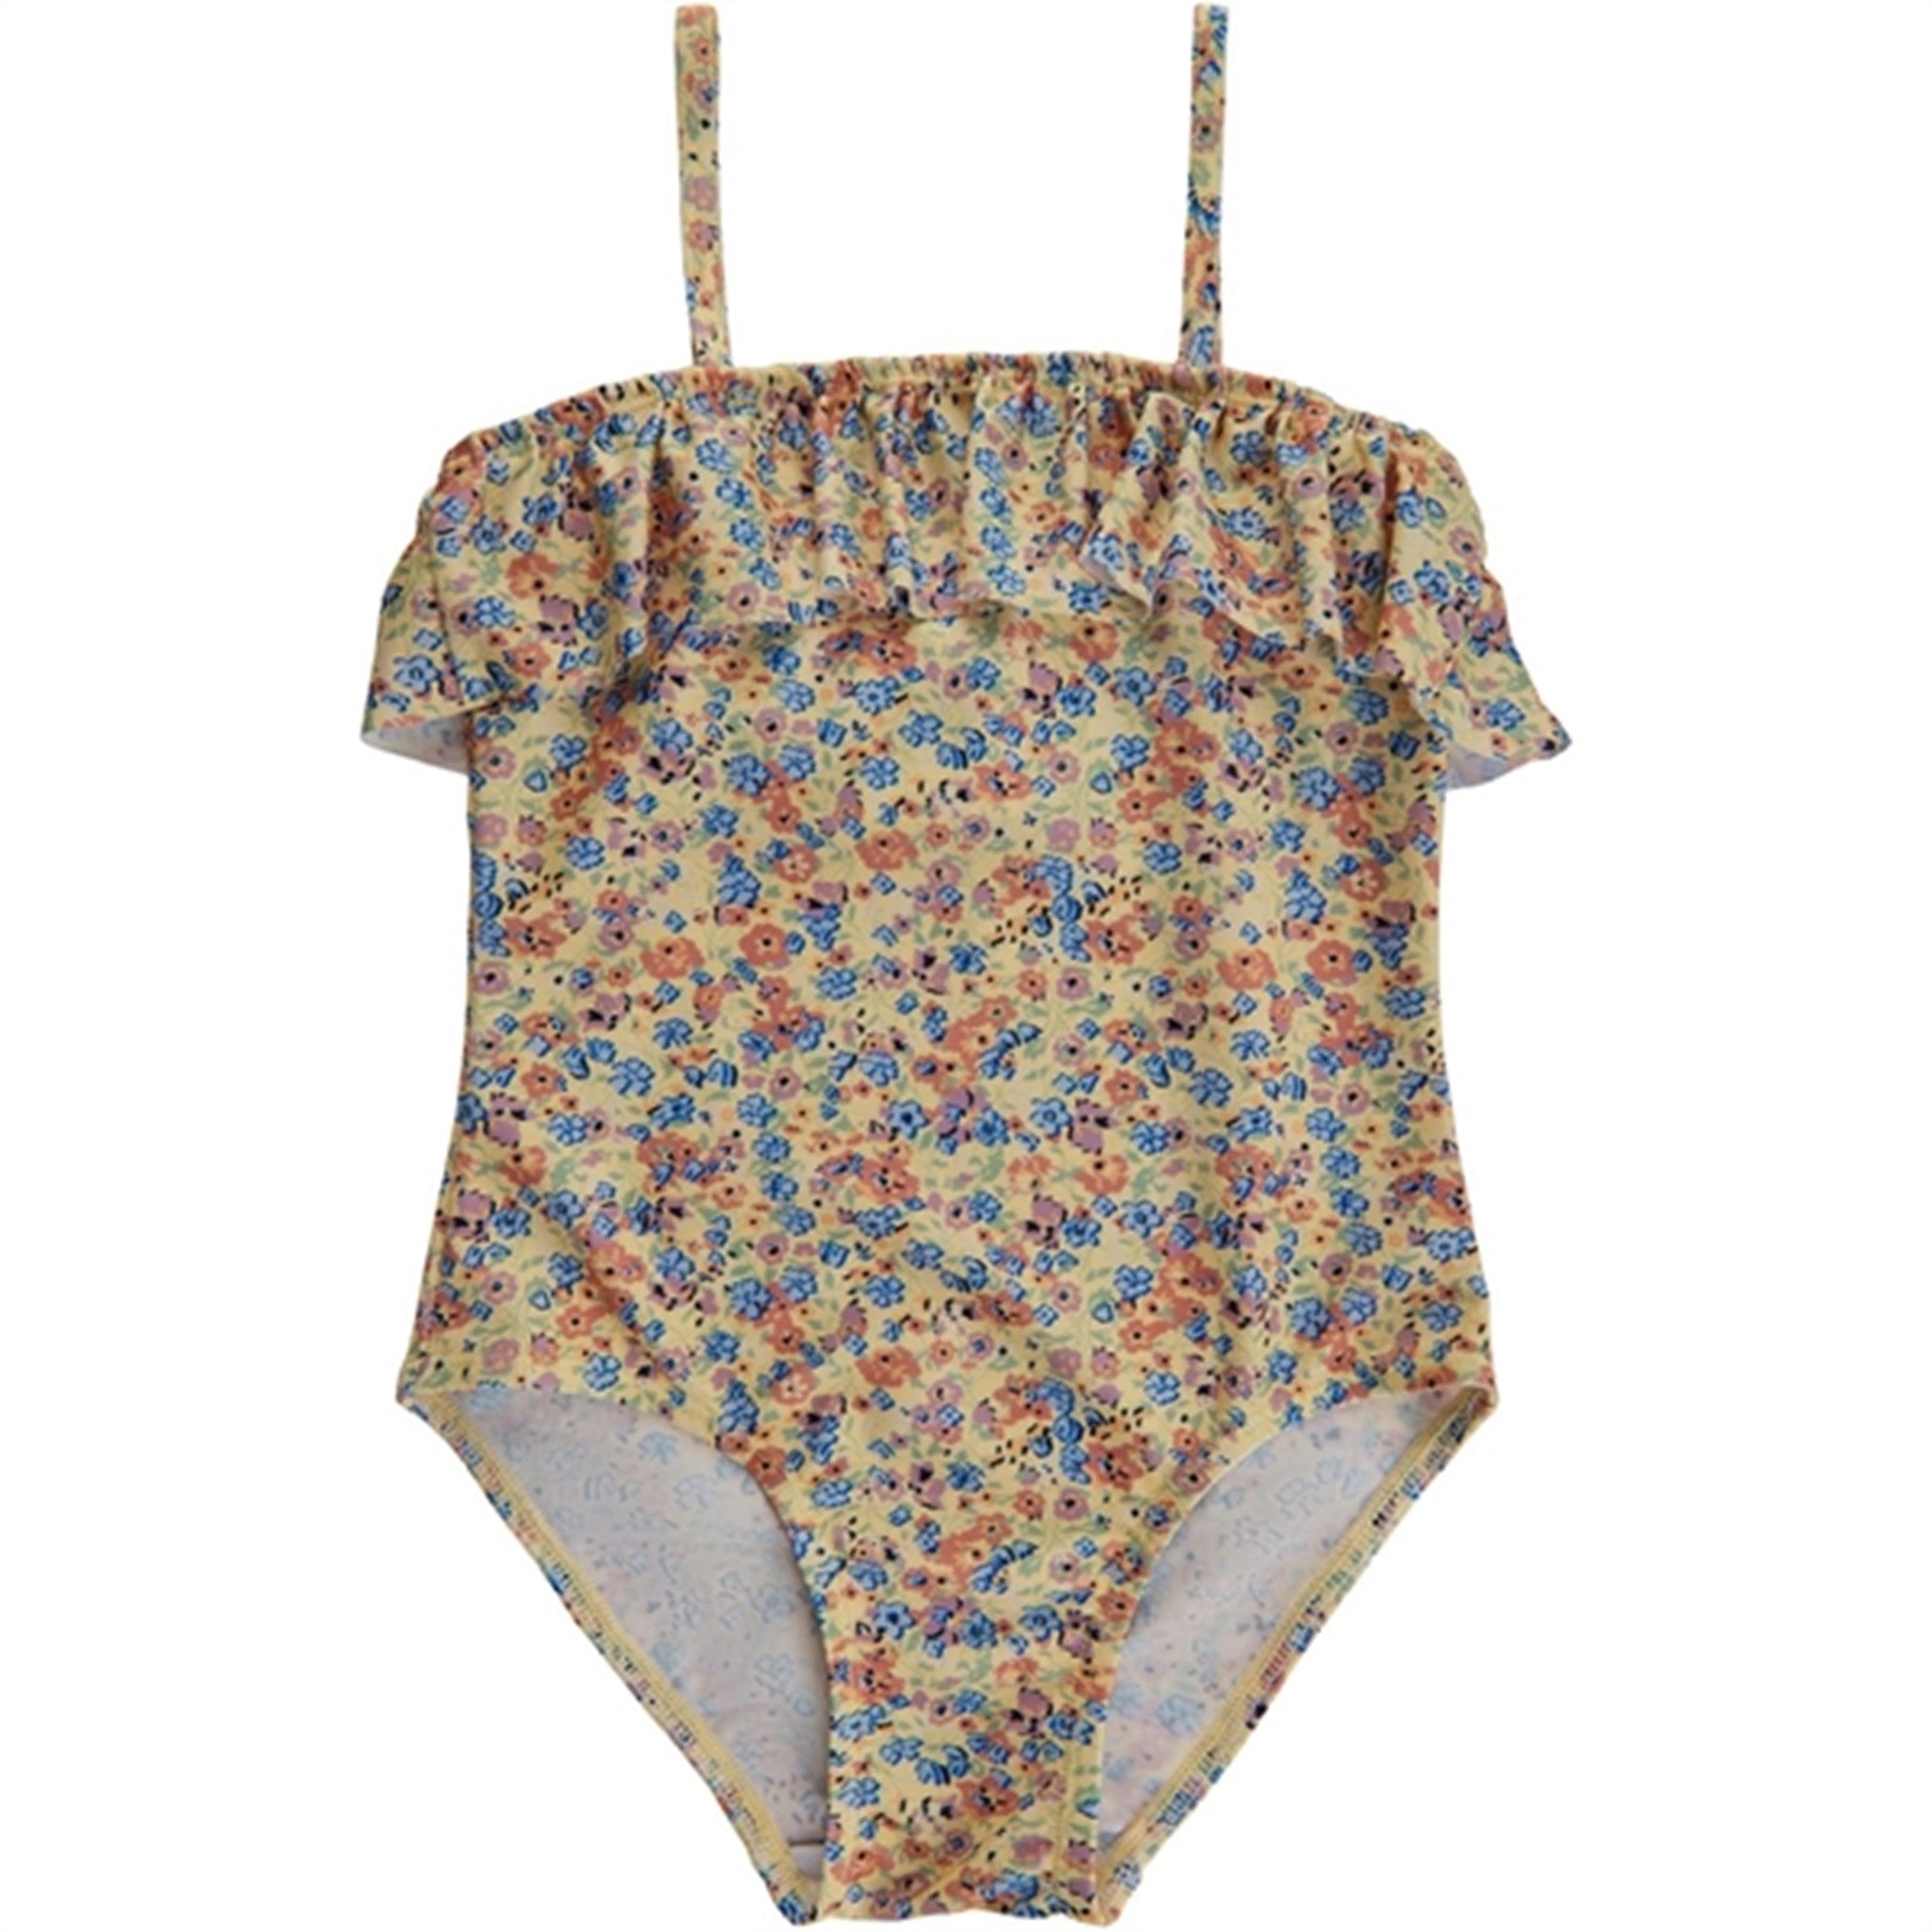 THE NEW Flower AOP Fally Swimsuit